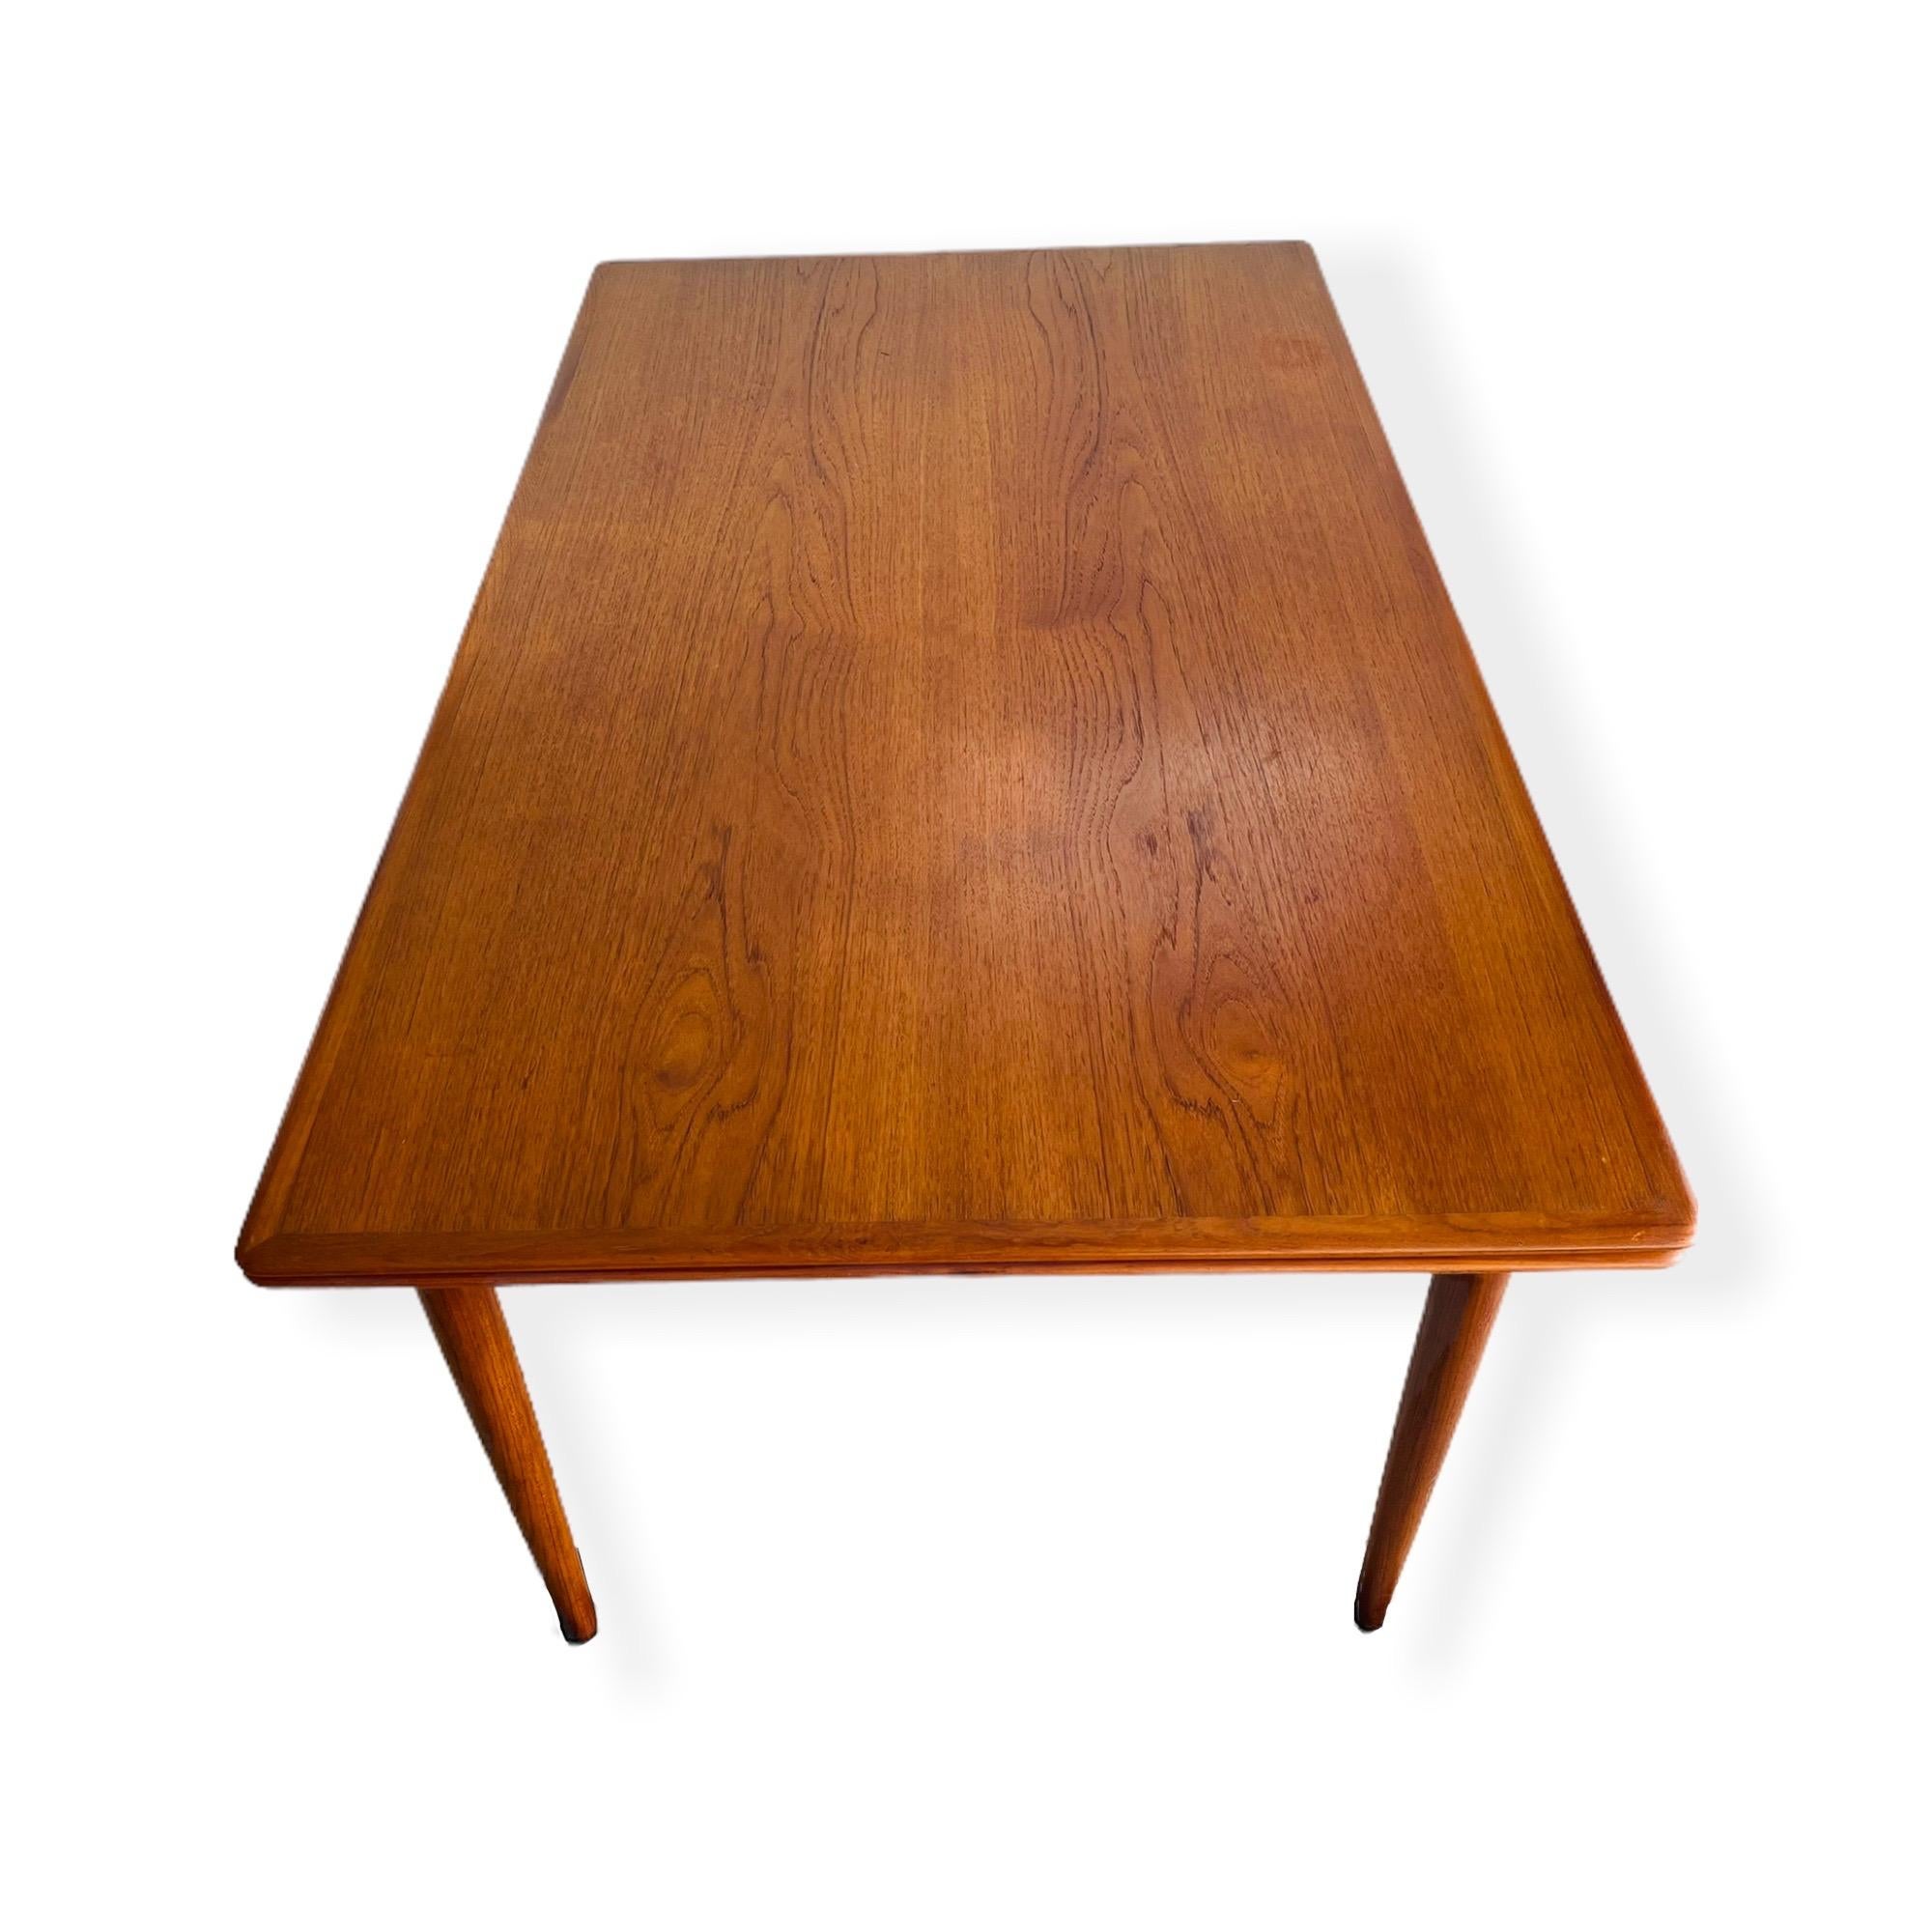 Stunning large Mid-Century Danish Modern teak draw-leaf extension dining table designed by Skovmand & Andersen for Moreddi. This table has built in leaf on each side that slides/hide under each side of the table. This table can easily sit 10 people